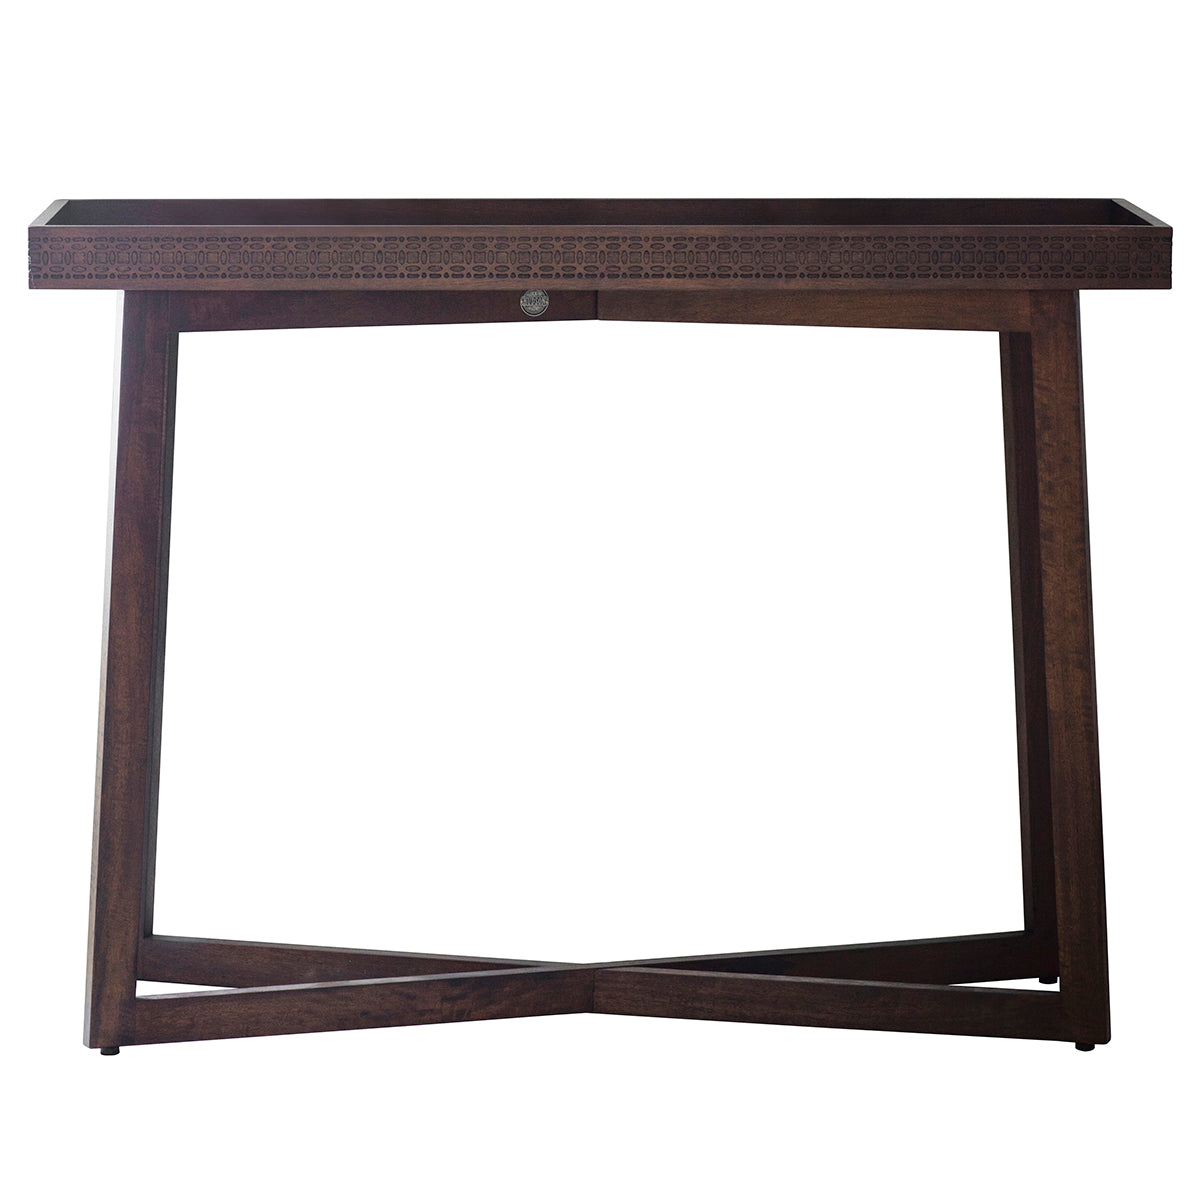 A Dartington Retreat Console Table with a wooden frame and top, perfect for interior decor and home furniture from Kikiathome.co.uk.